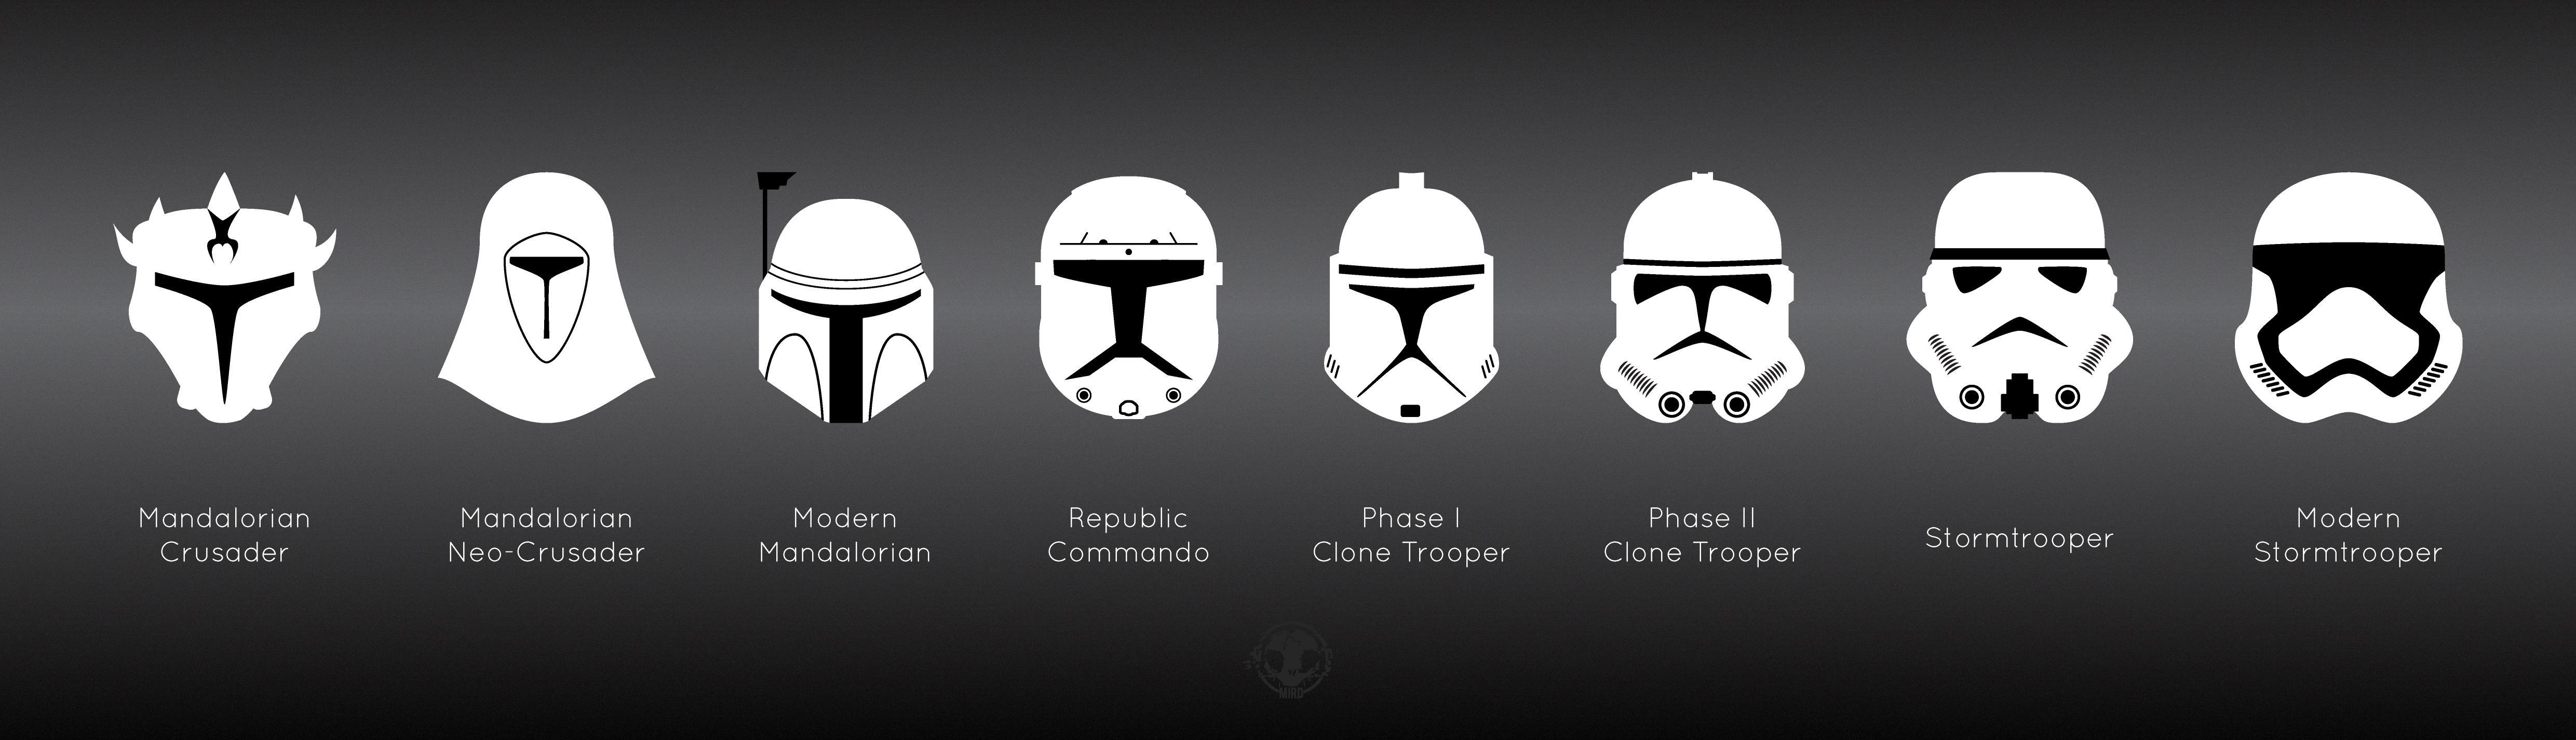 I love the evolution of the trooper helmet design, so I made a series of simple graphics showing the progression from early Mandalorian to the Episode 7 Stormtrooper